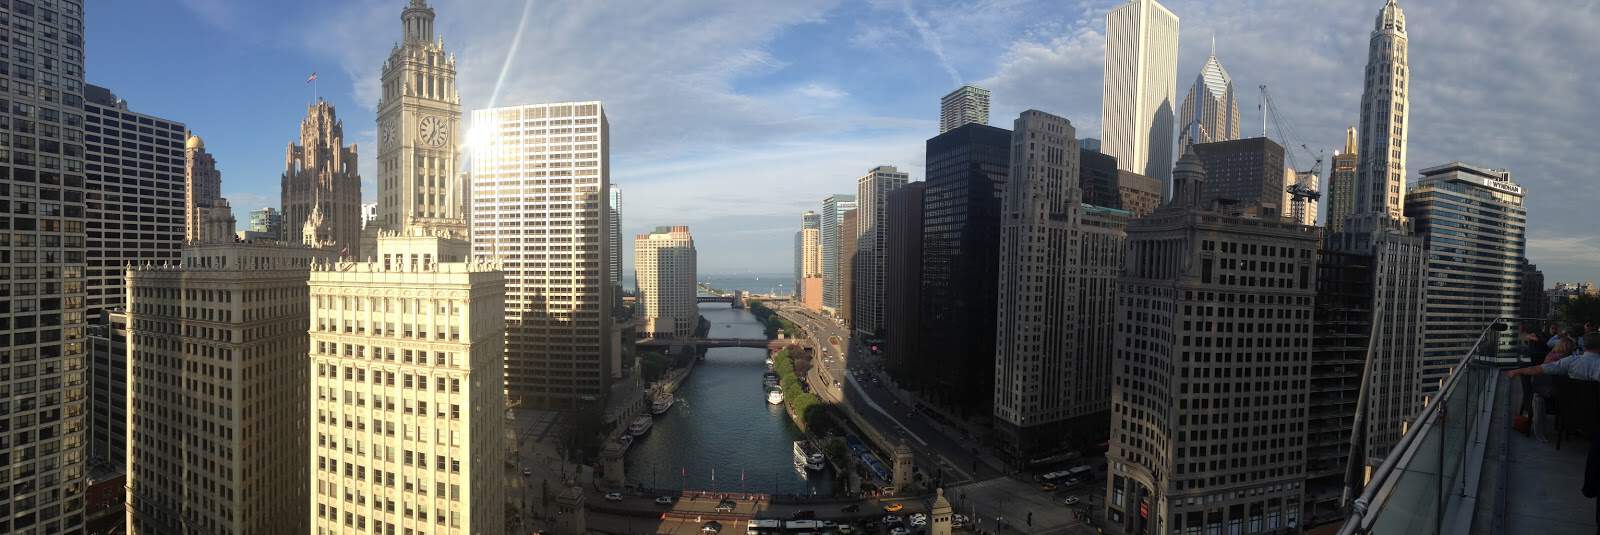 The view from Sixteen at the Trump Tower in Chicago